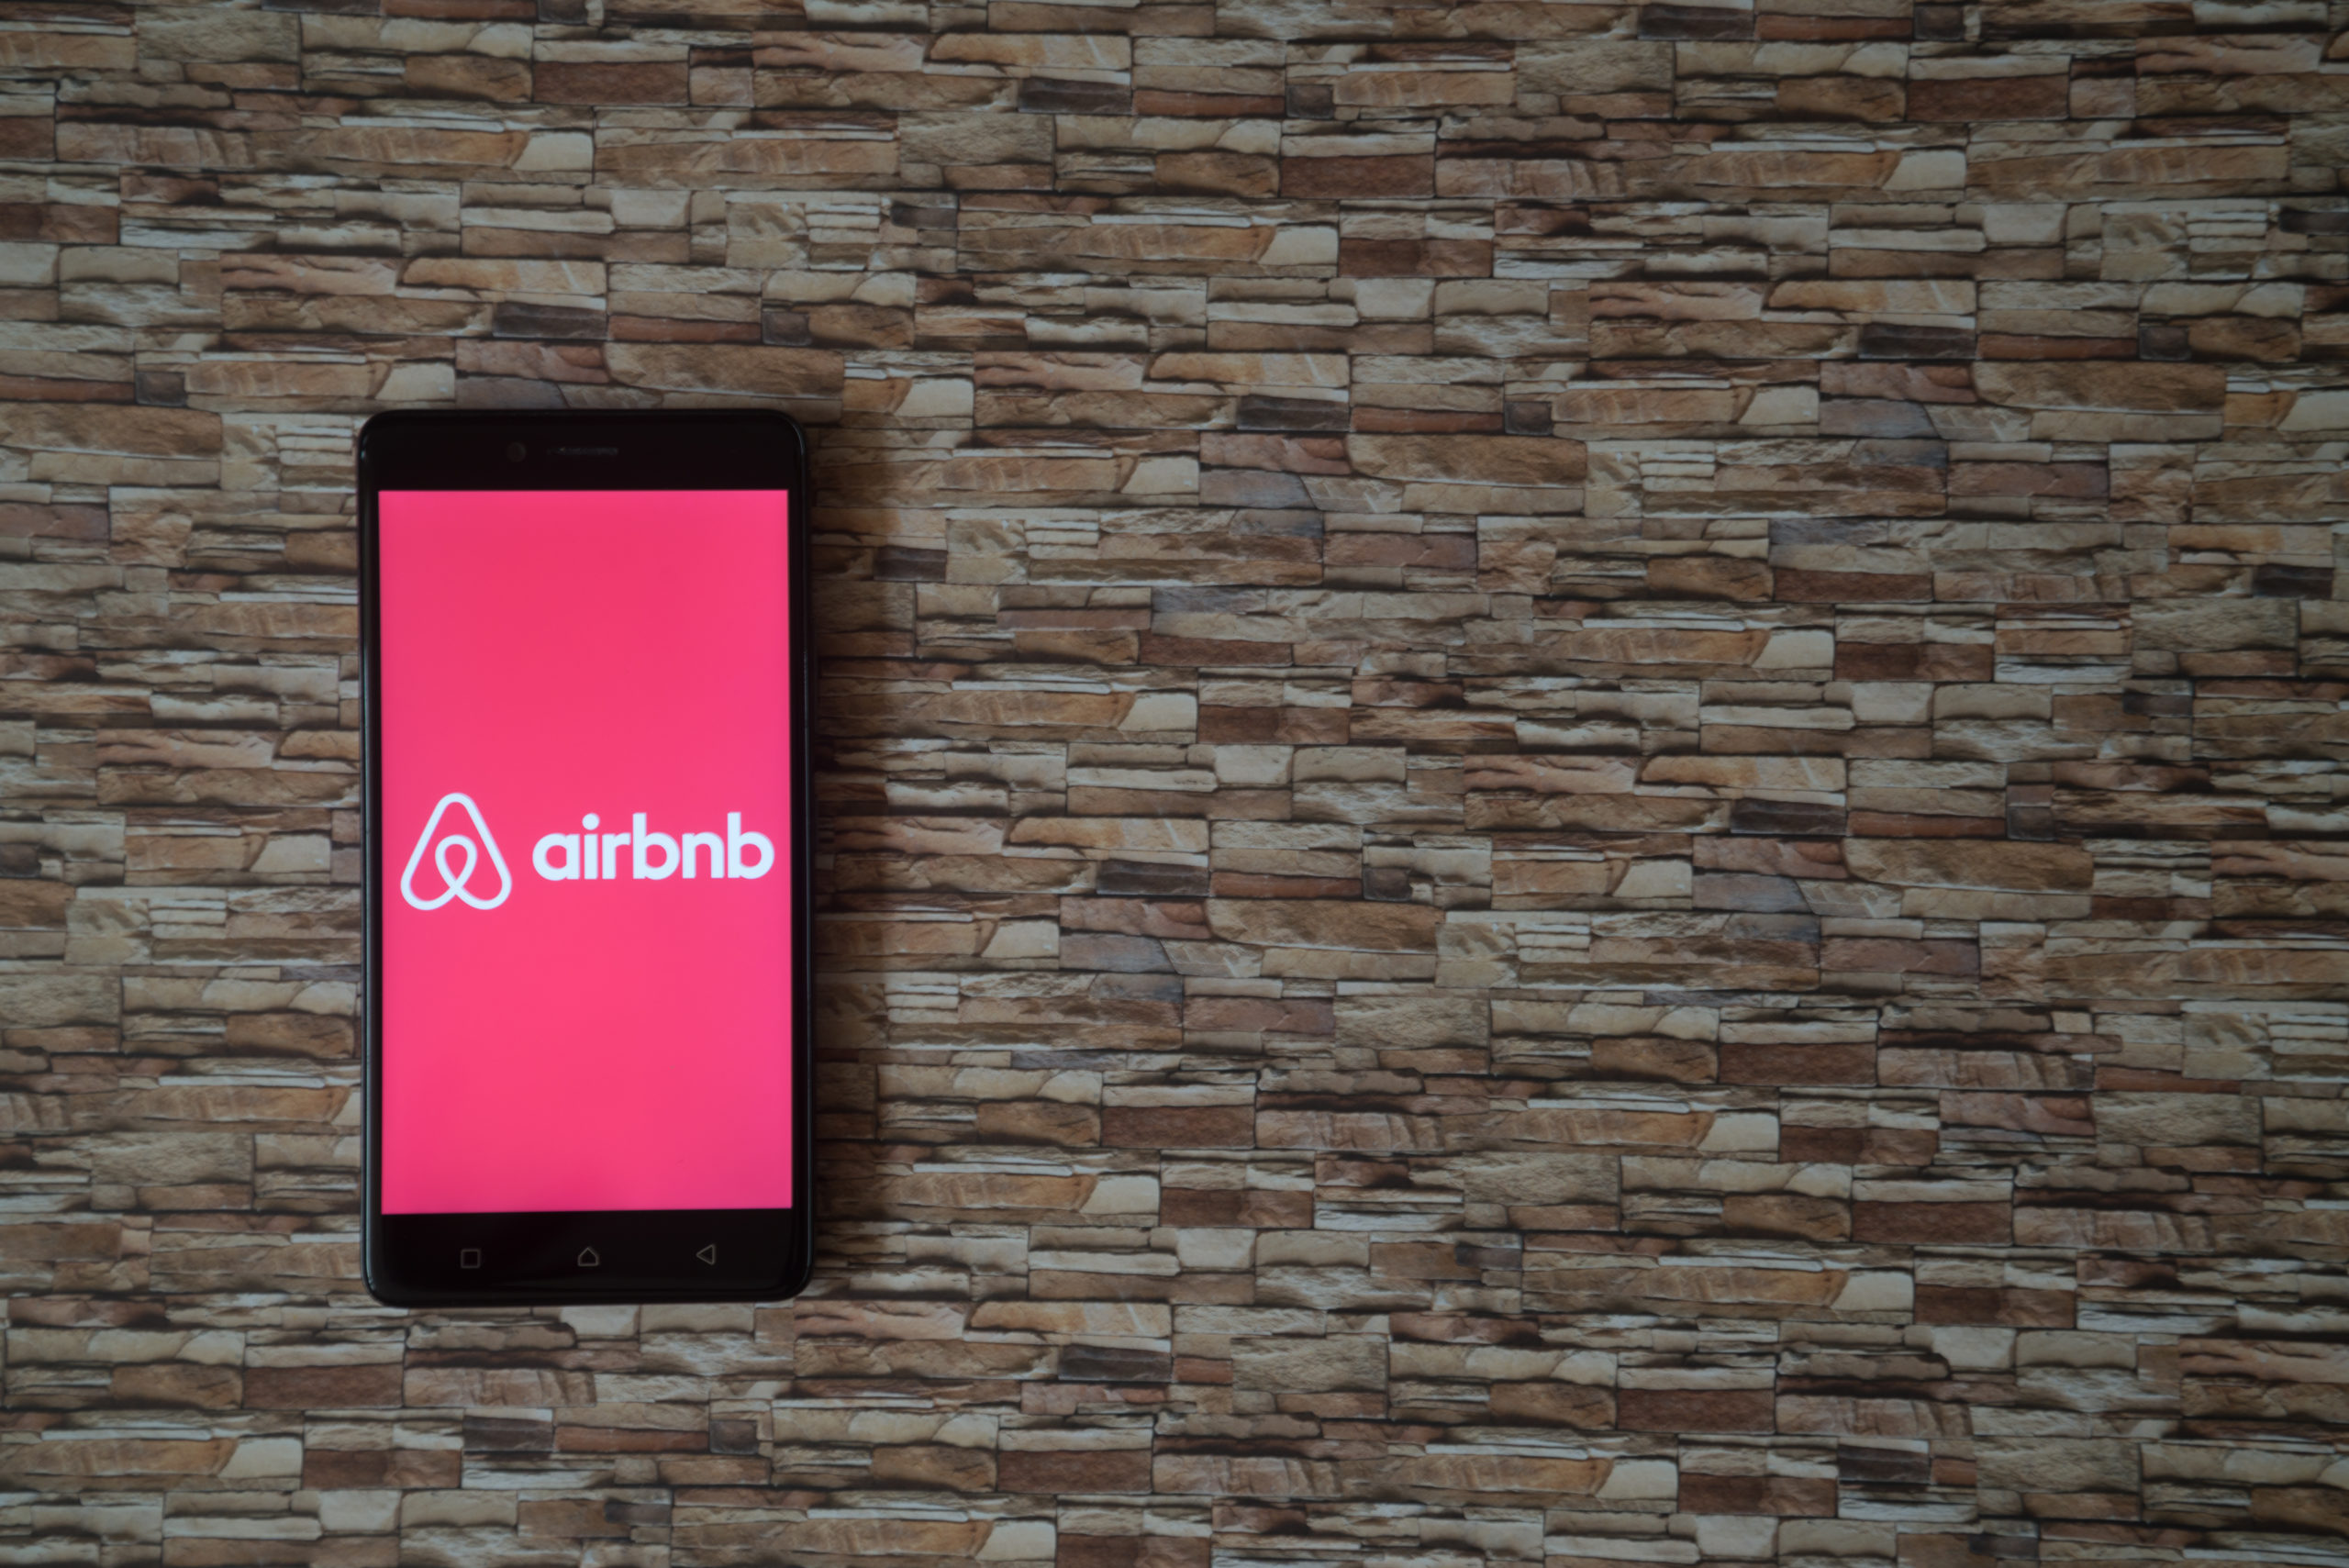 According to Bloomberg, former Airbnb employees said the company deals yearly with thousands of sexual assault allegations. However, the public have had little visibility into the scope of safety incidents involving Airbnb.